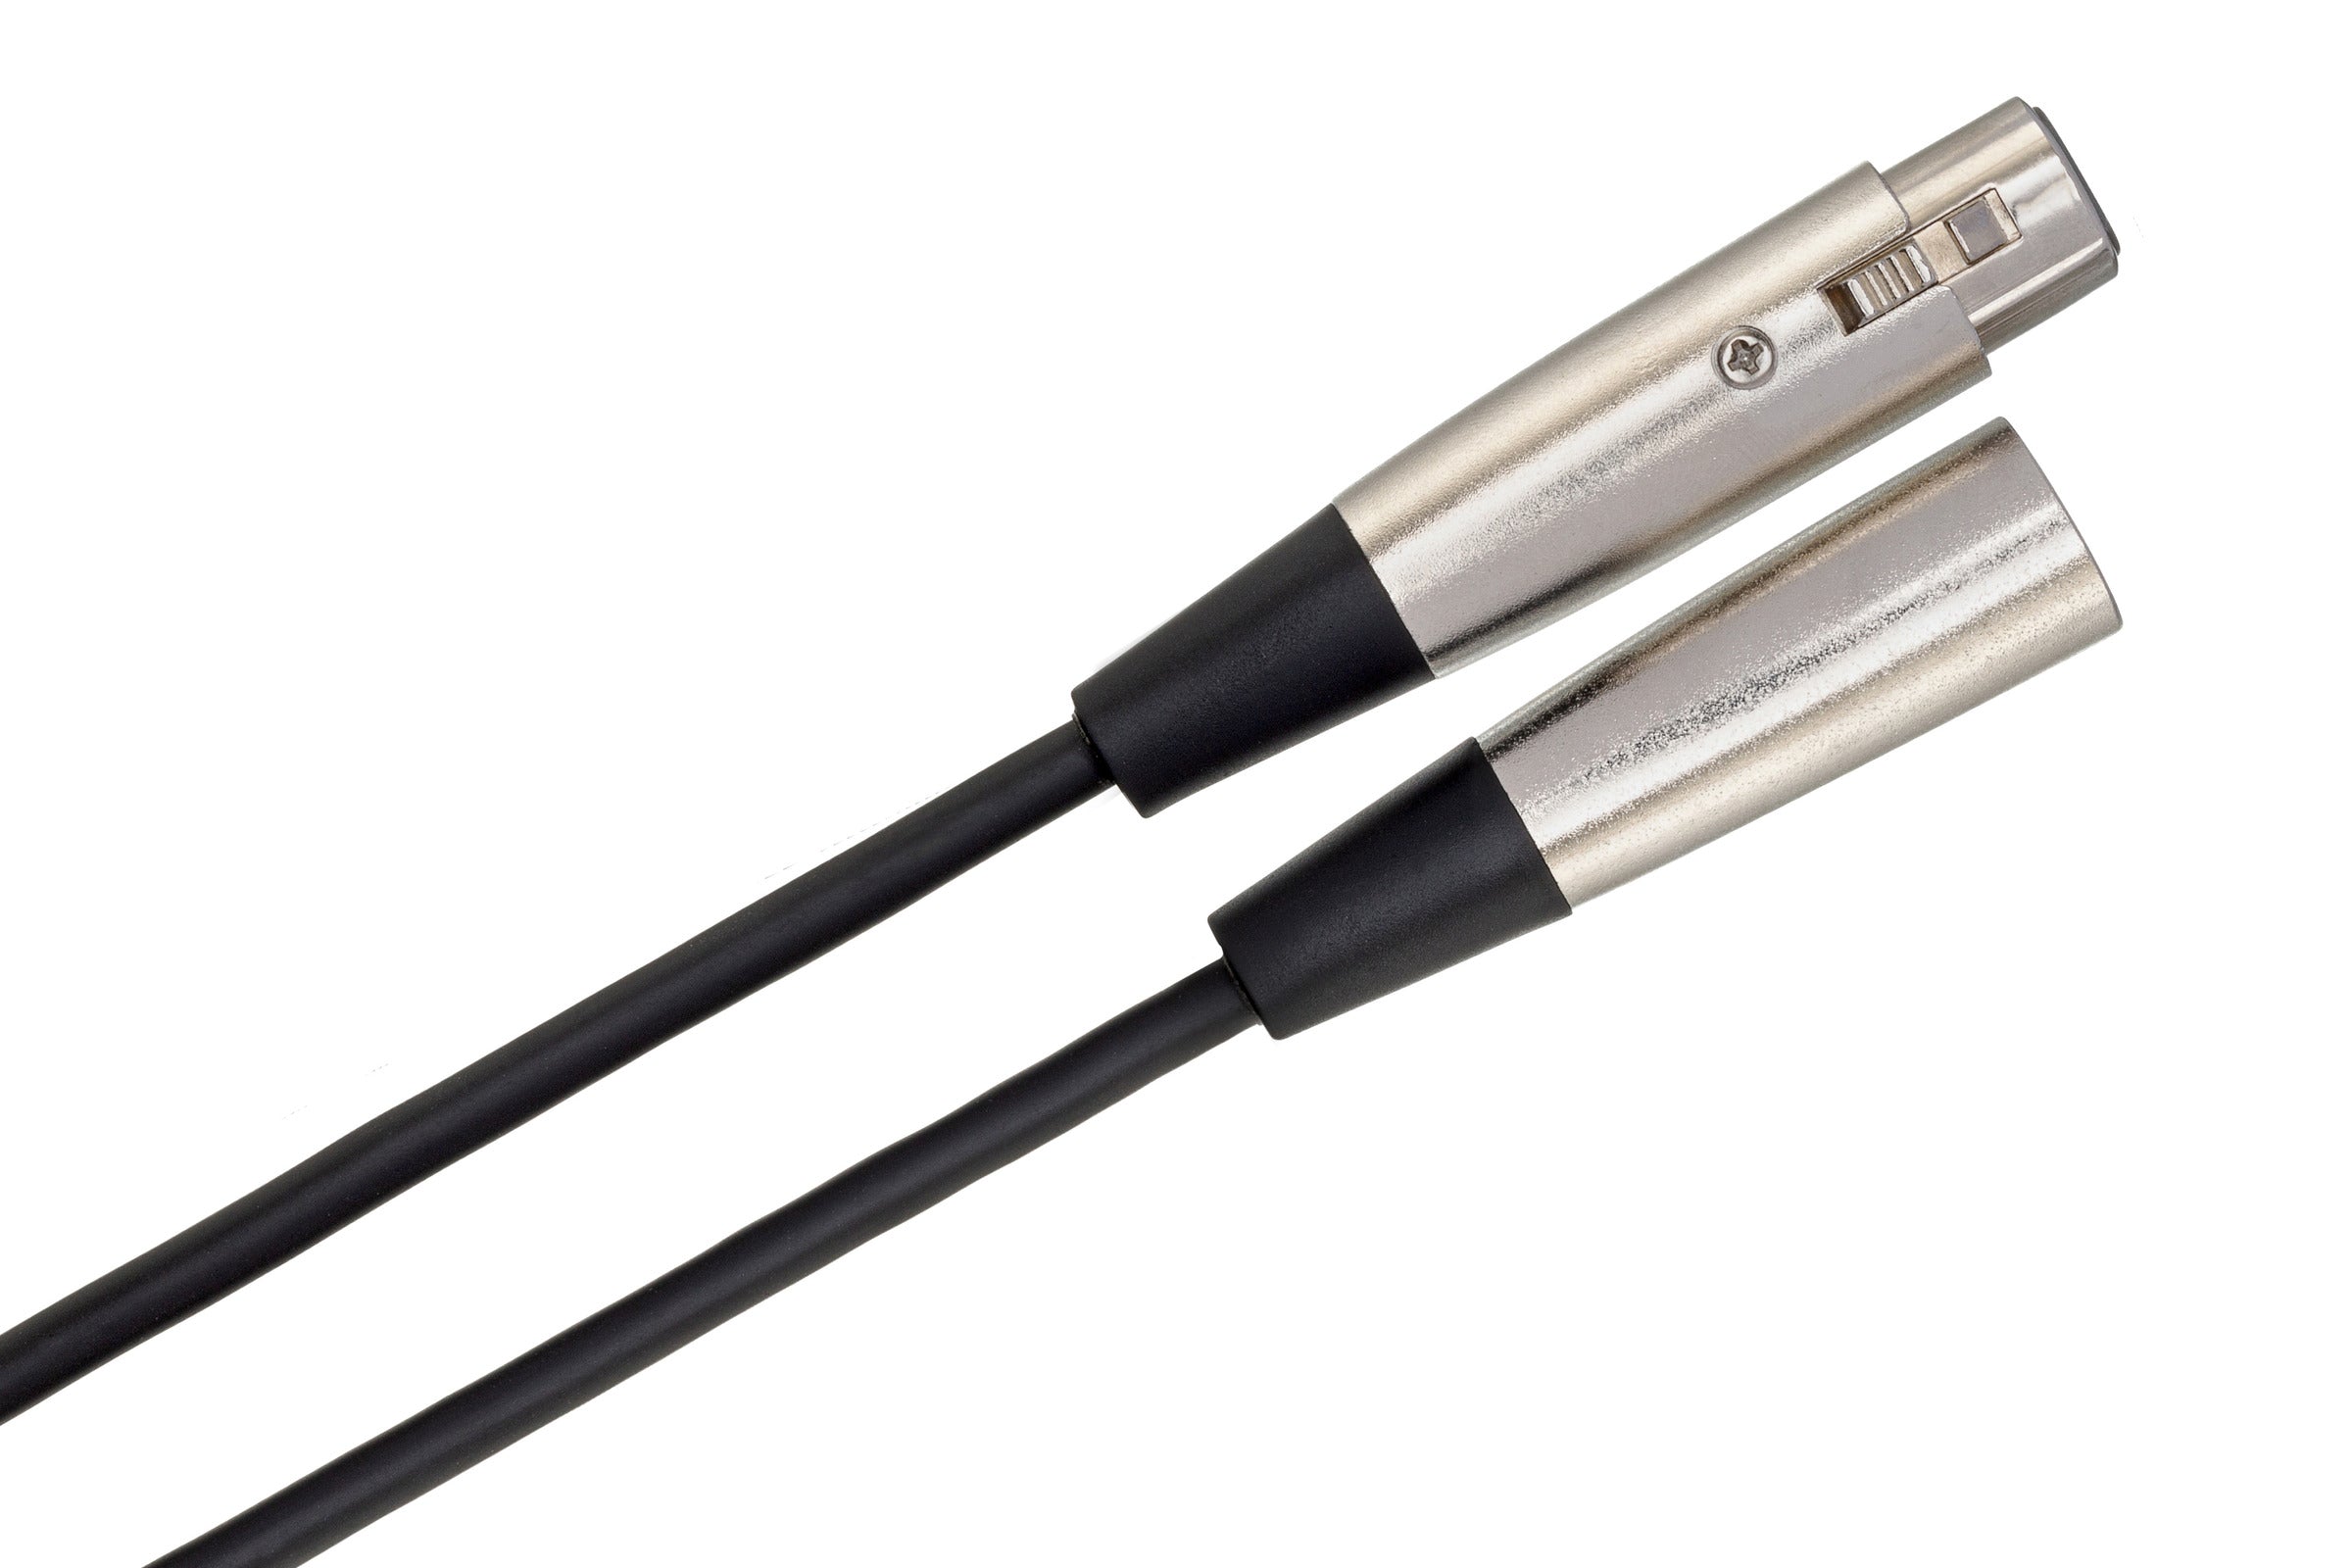 Hosa MCL-110 Microphone Cable, Hosa XLR3F to XLR3M, 10 ft